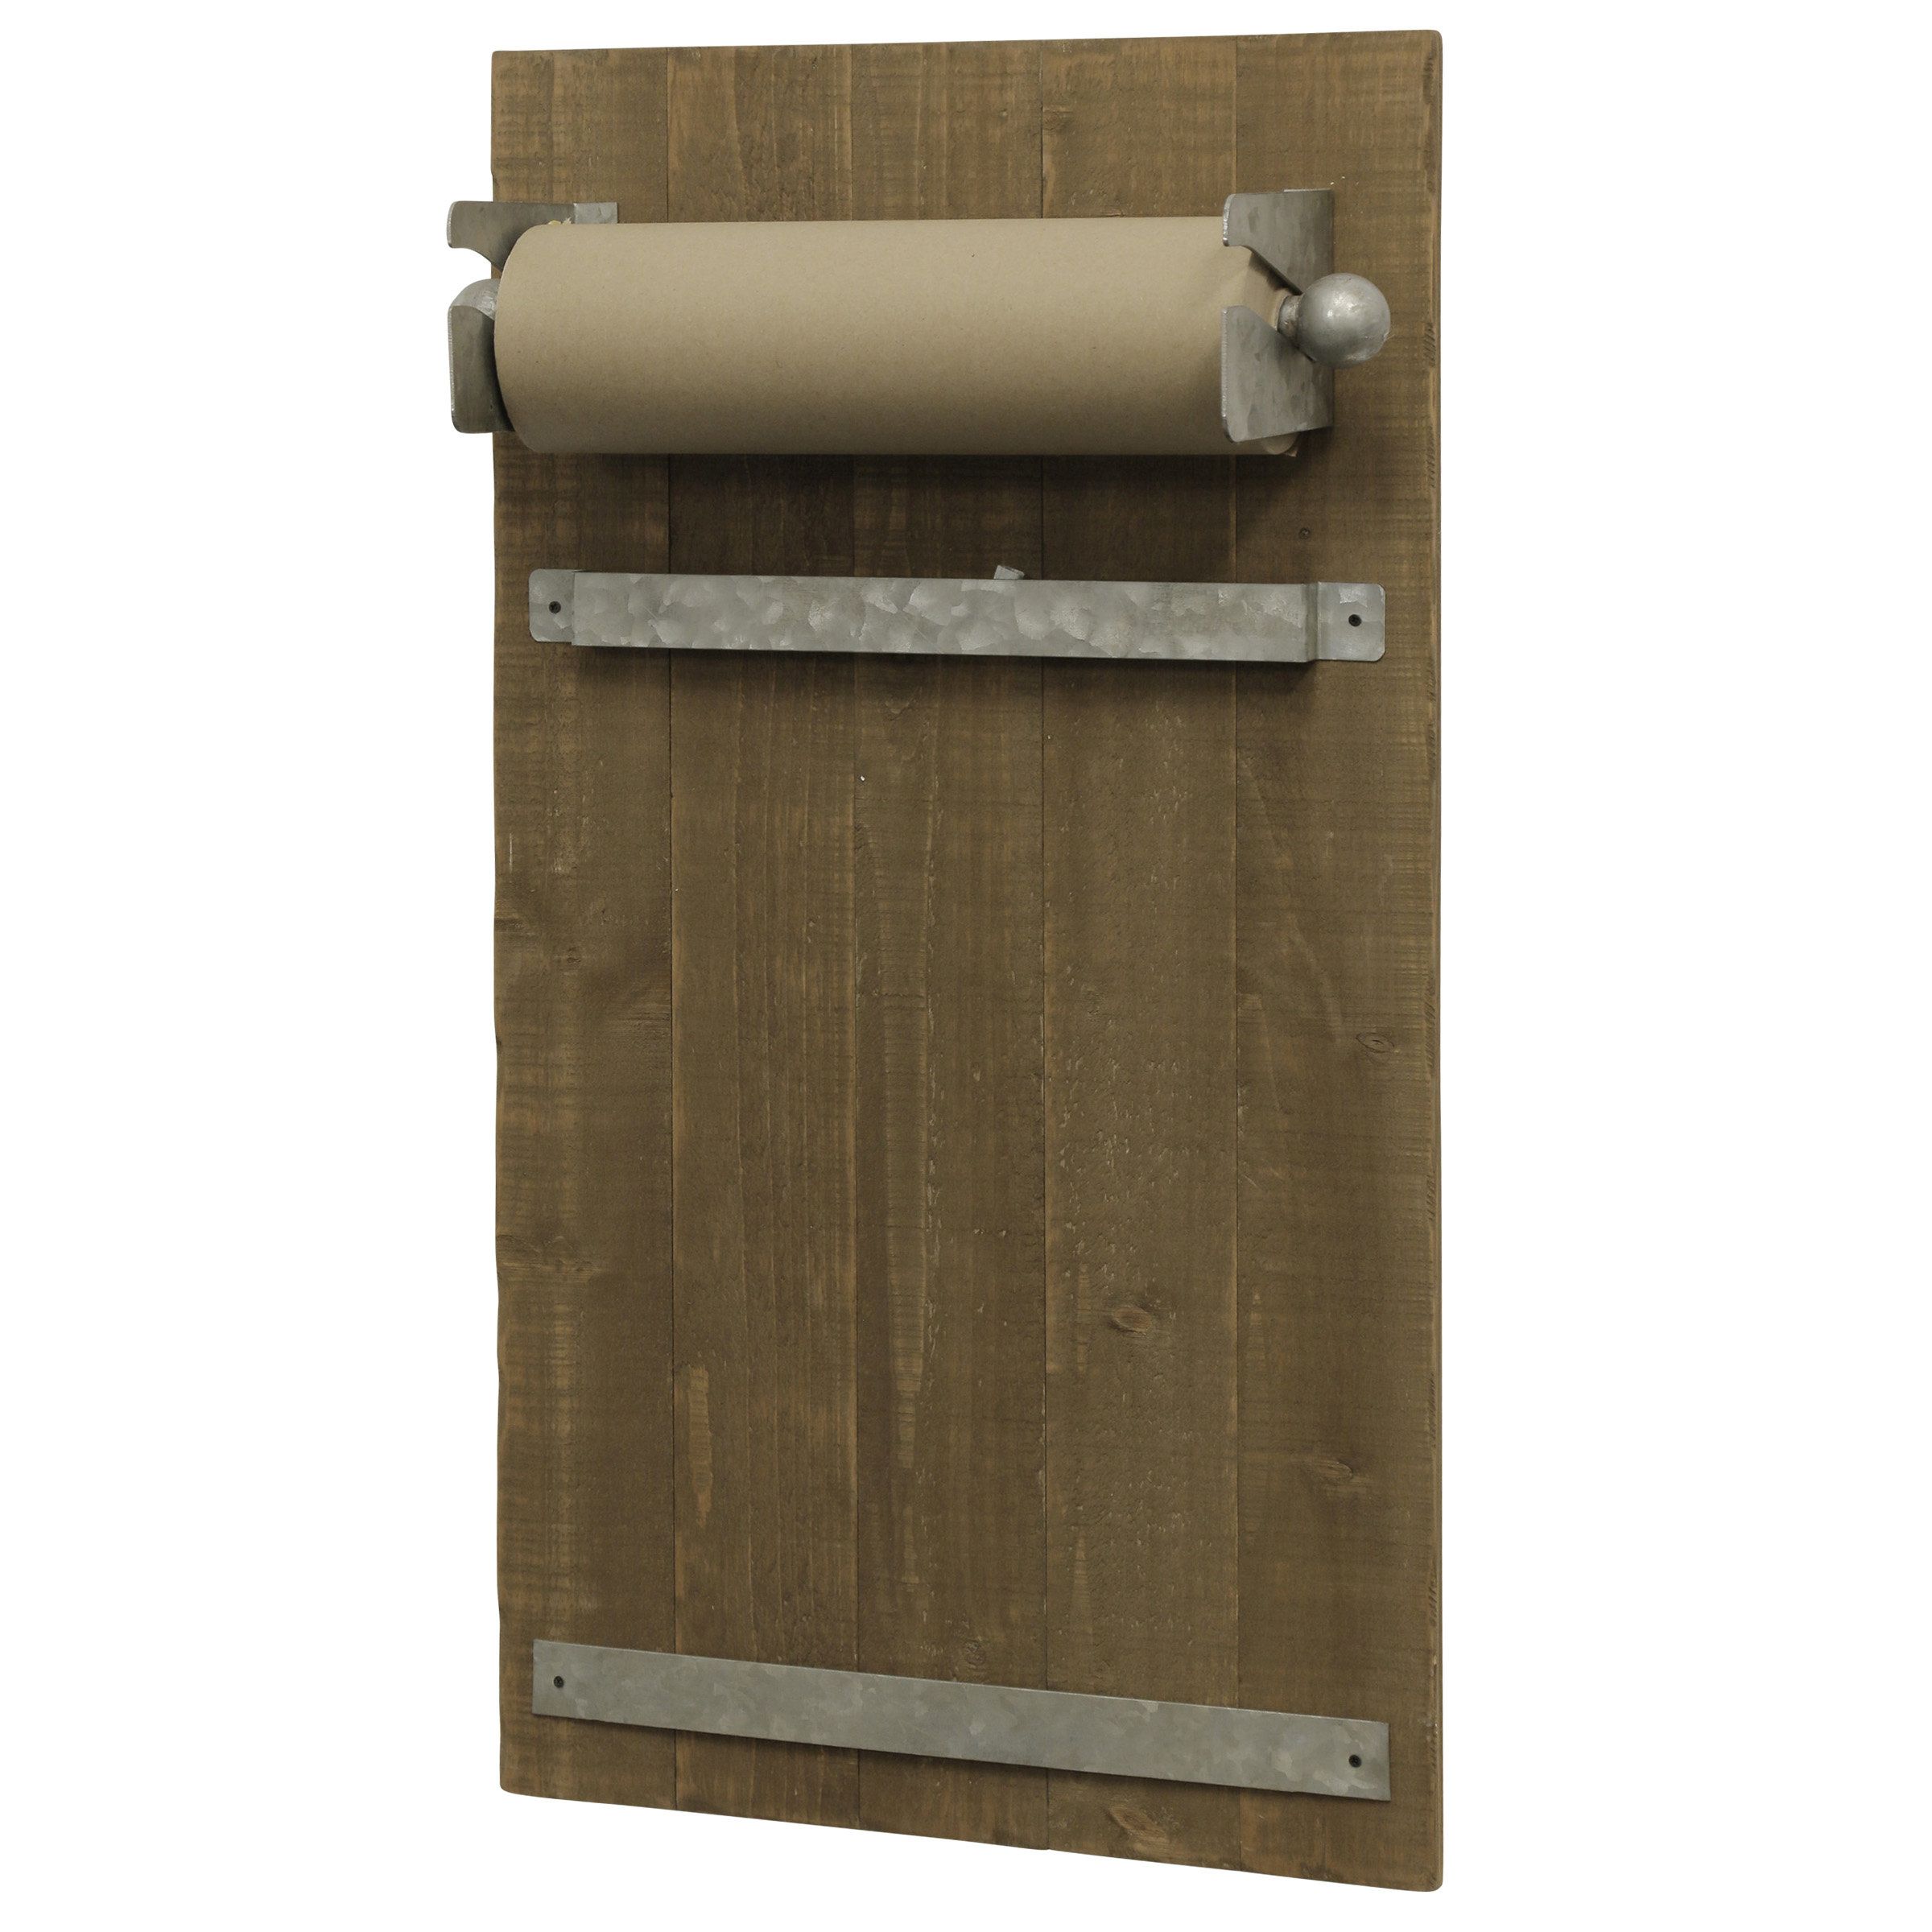 Scroll Panel Wall Decor With Regard To Most Up To Date Wooden Scroll Holder Wall Décor (View 20 of 20)